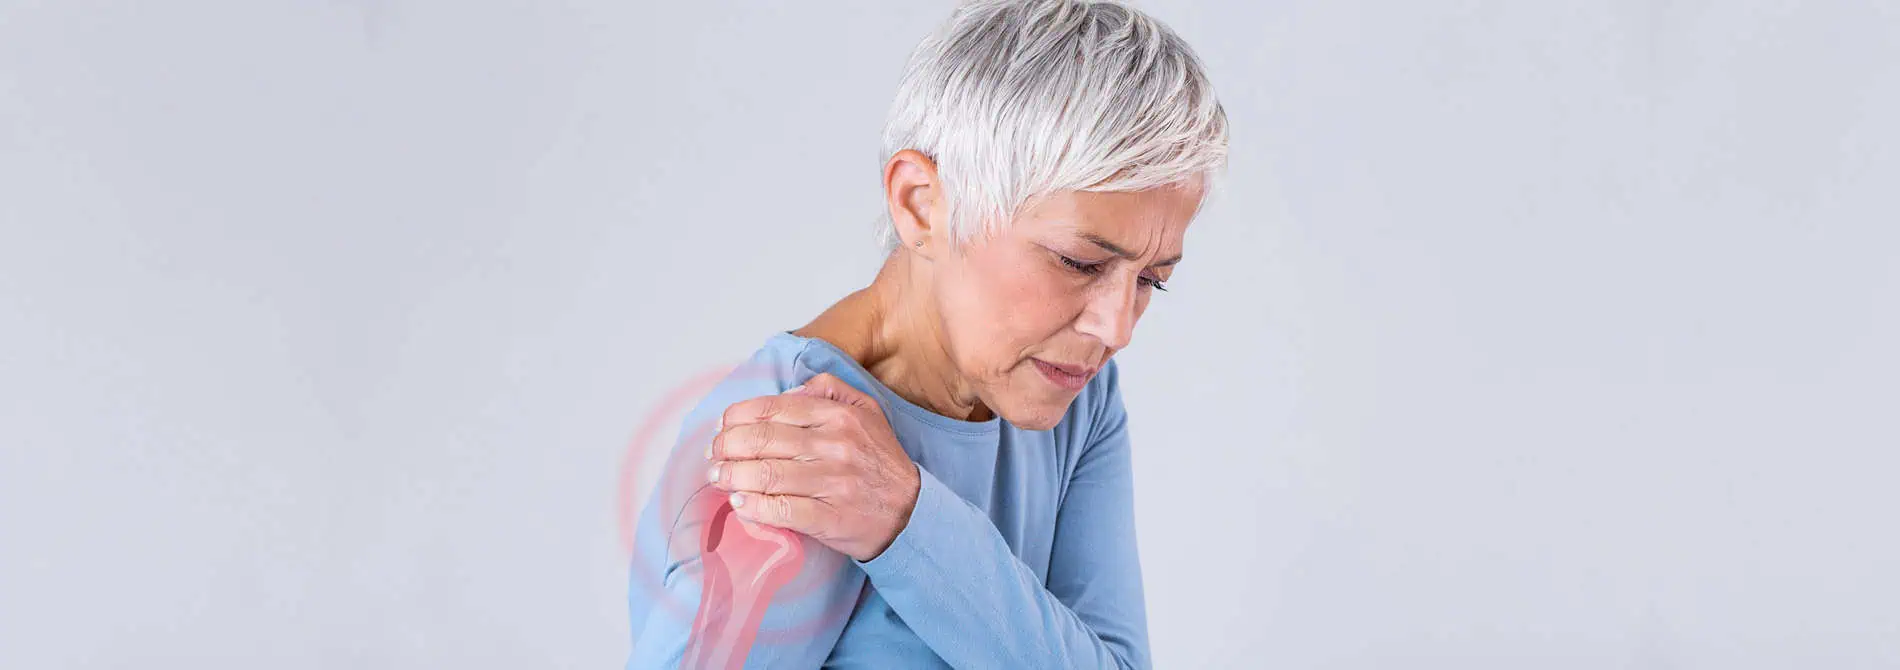 woman in pain holding her shoulder